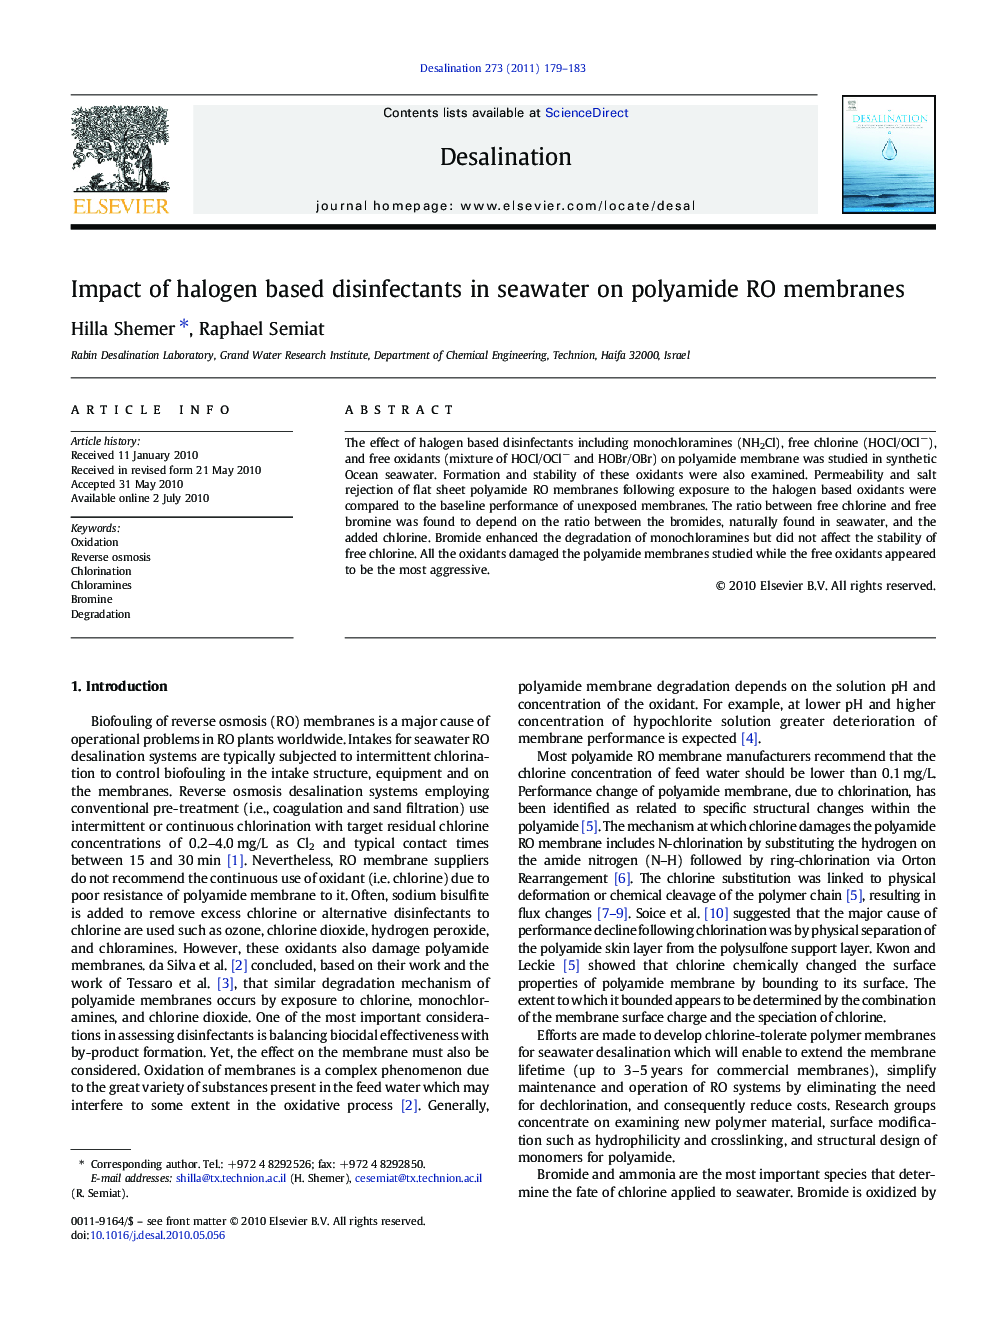 Impact of halogen based disinfectants in seawater on polyamide RO membranes